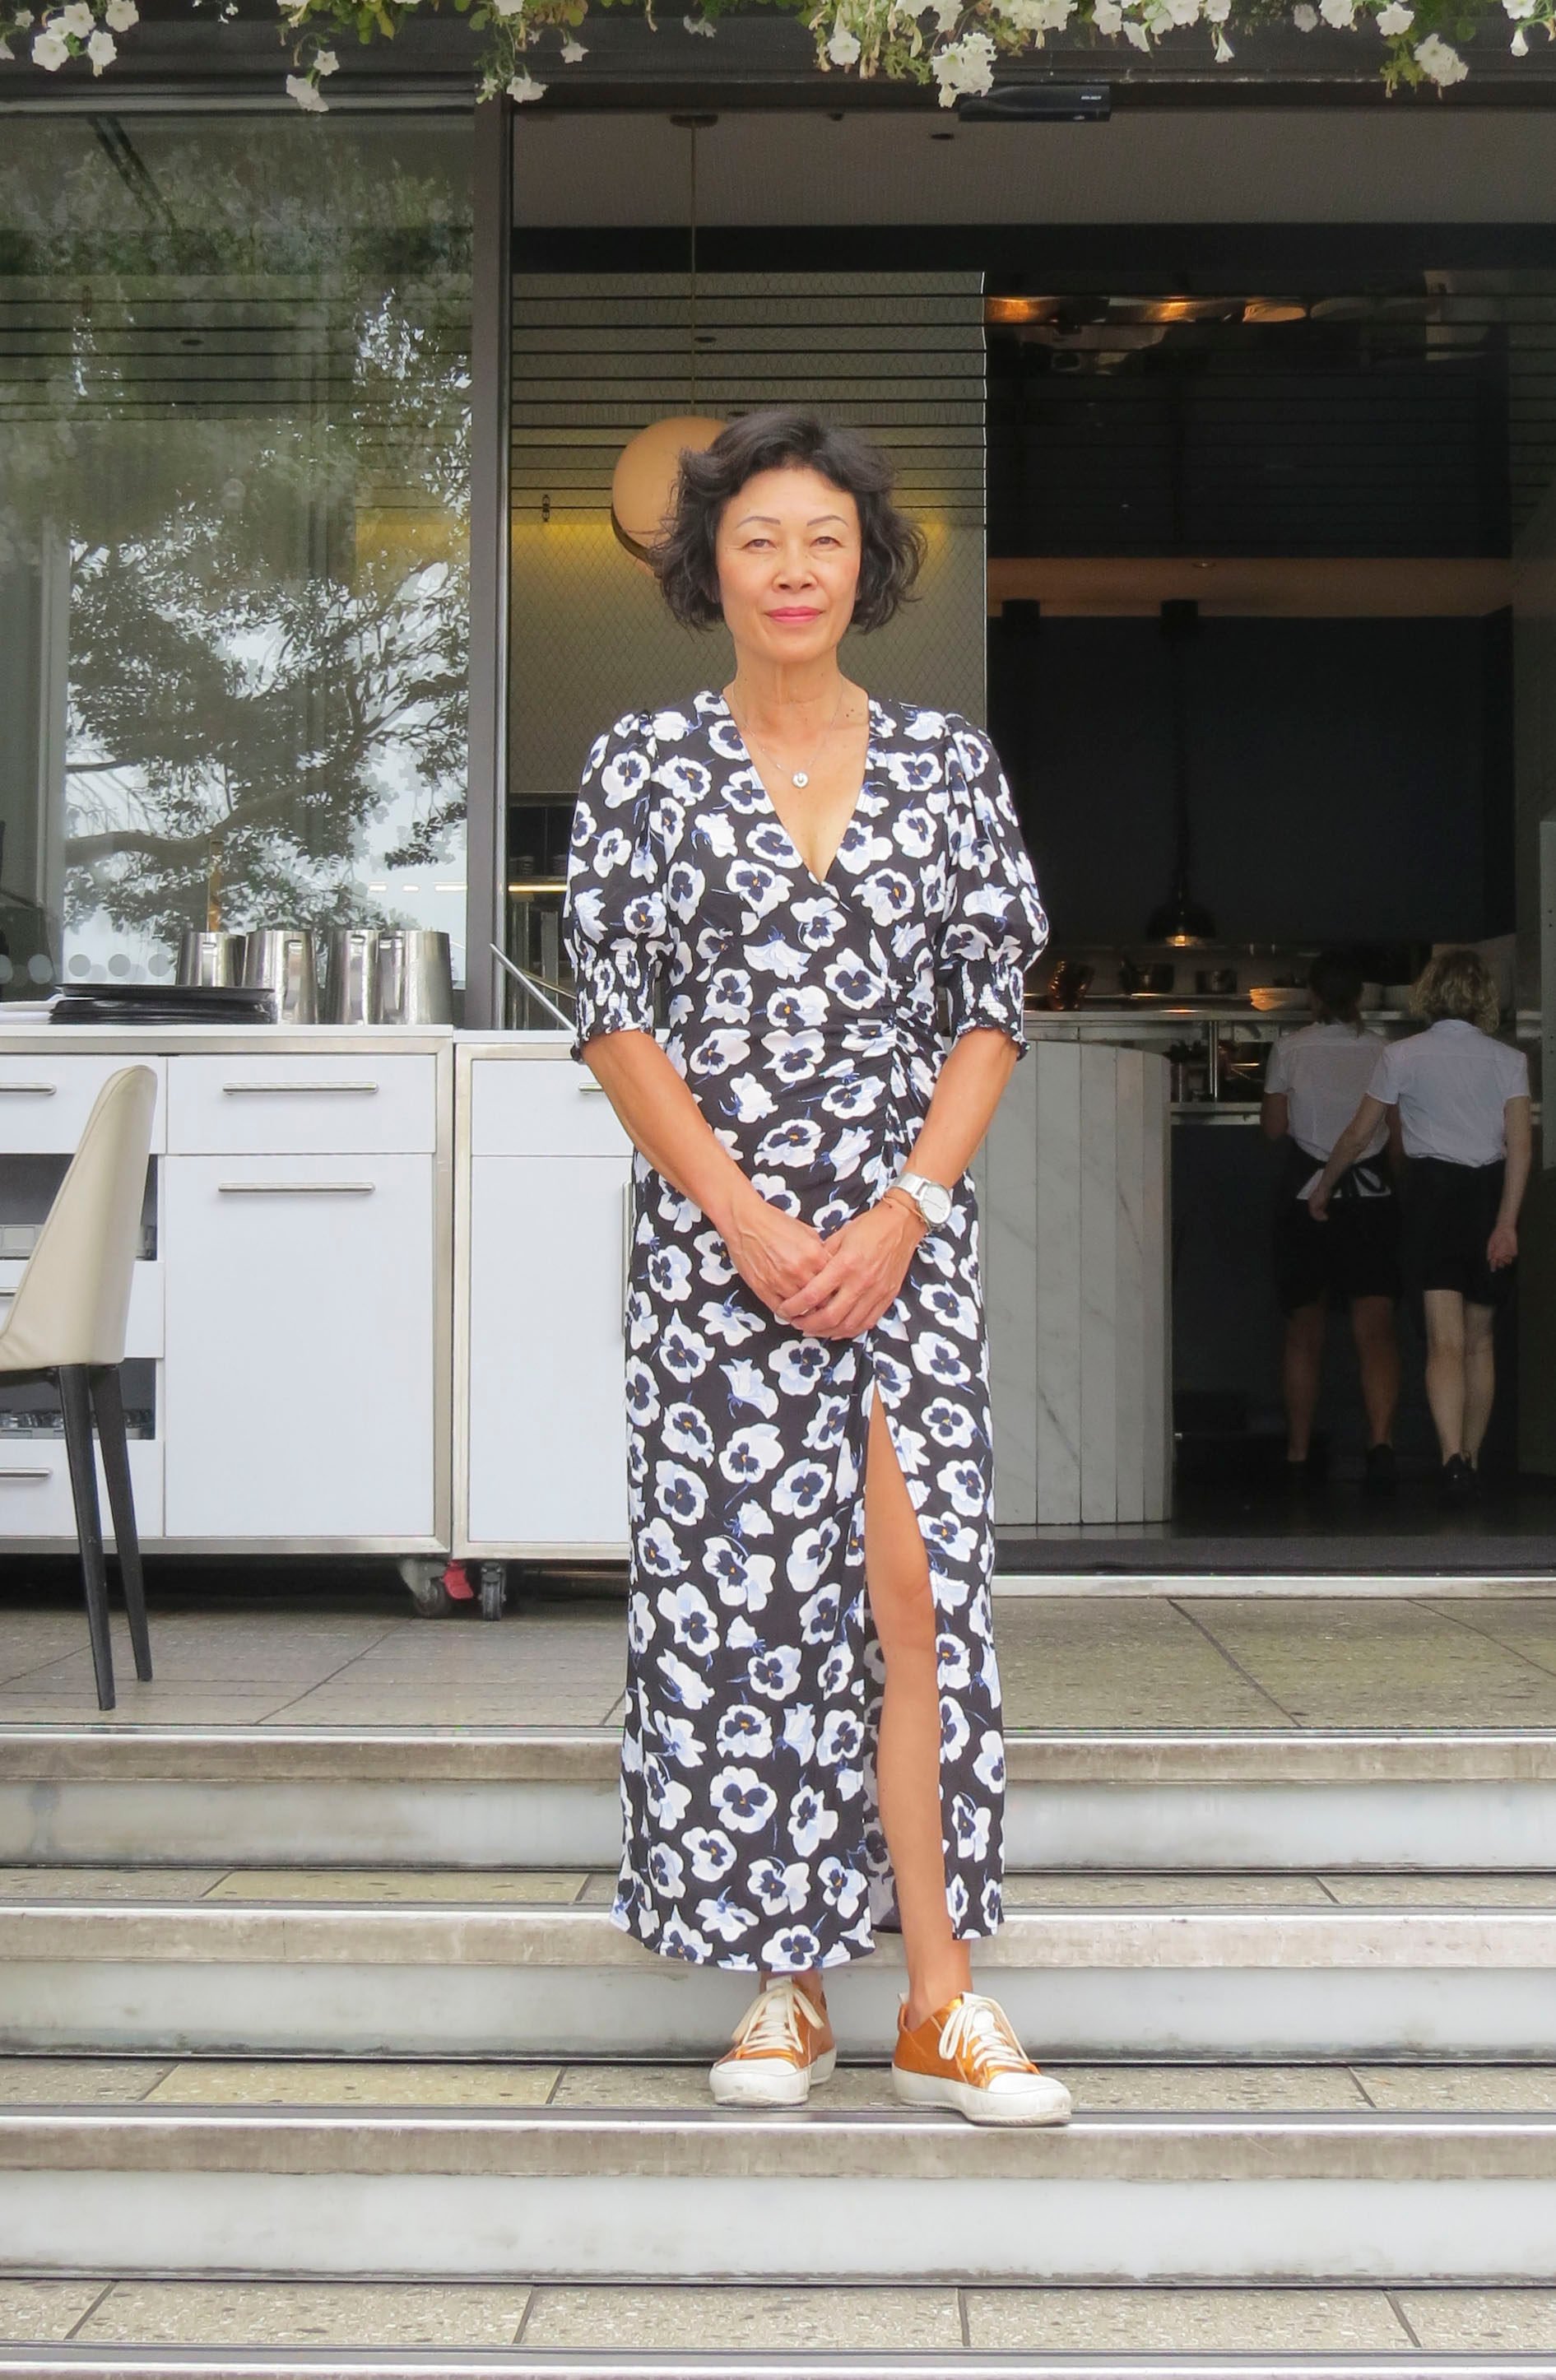 Geeling Ching at Auckland’s Soul Bar & Bistro, where she is now operations manager. The actress, tour adviser and former flame of David Bowie gives travel tips for her native New Zealand. Photo: Deborah Cassrels